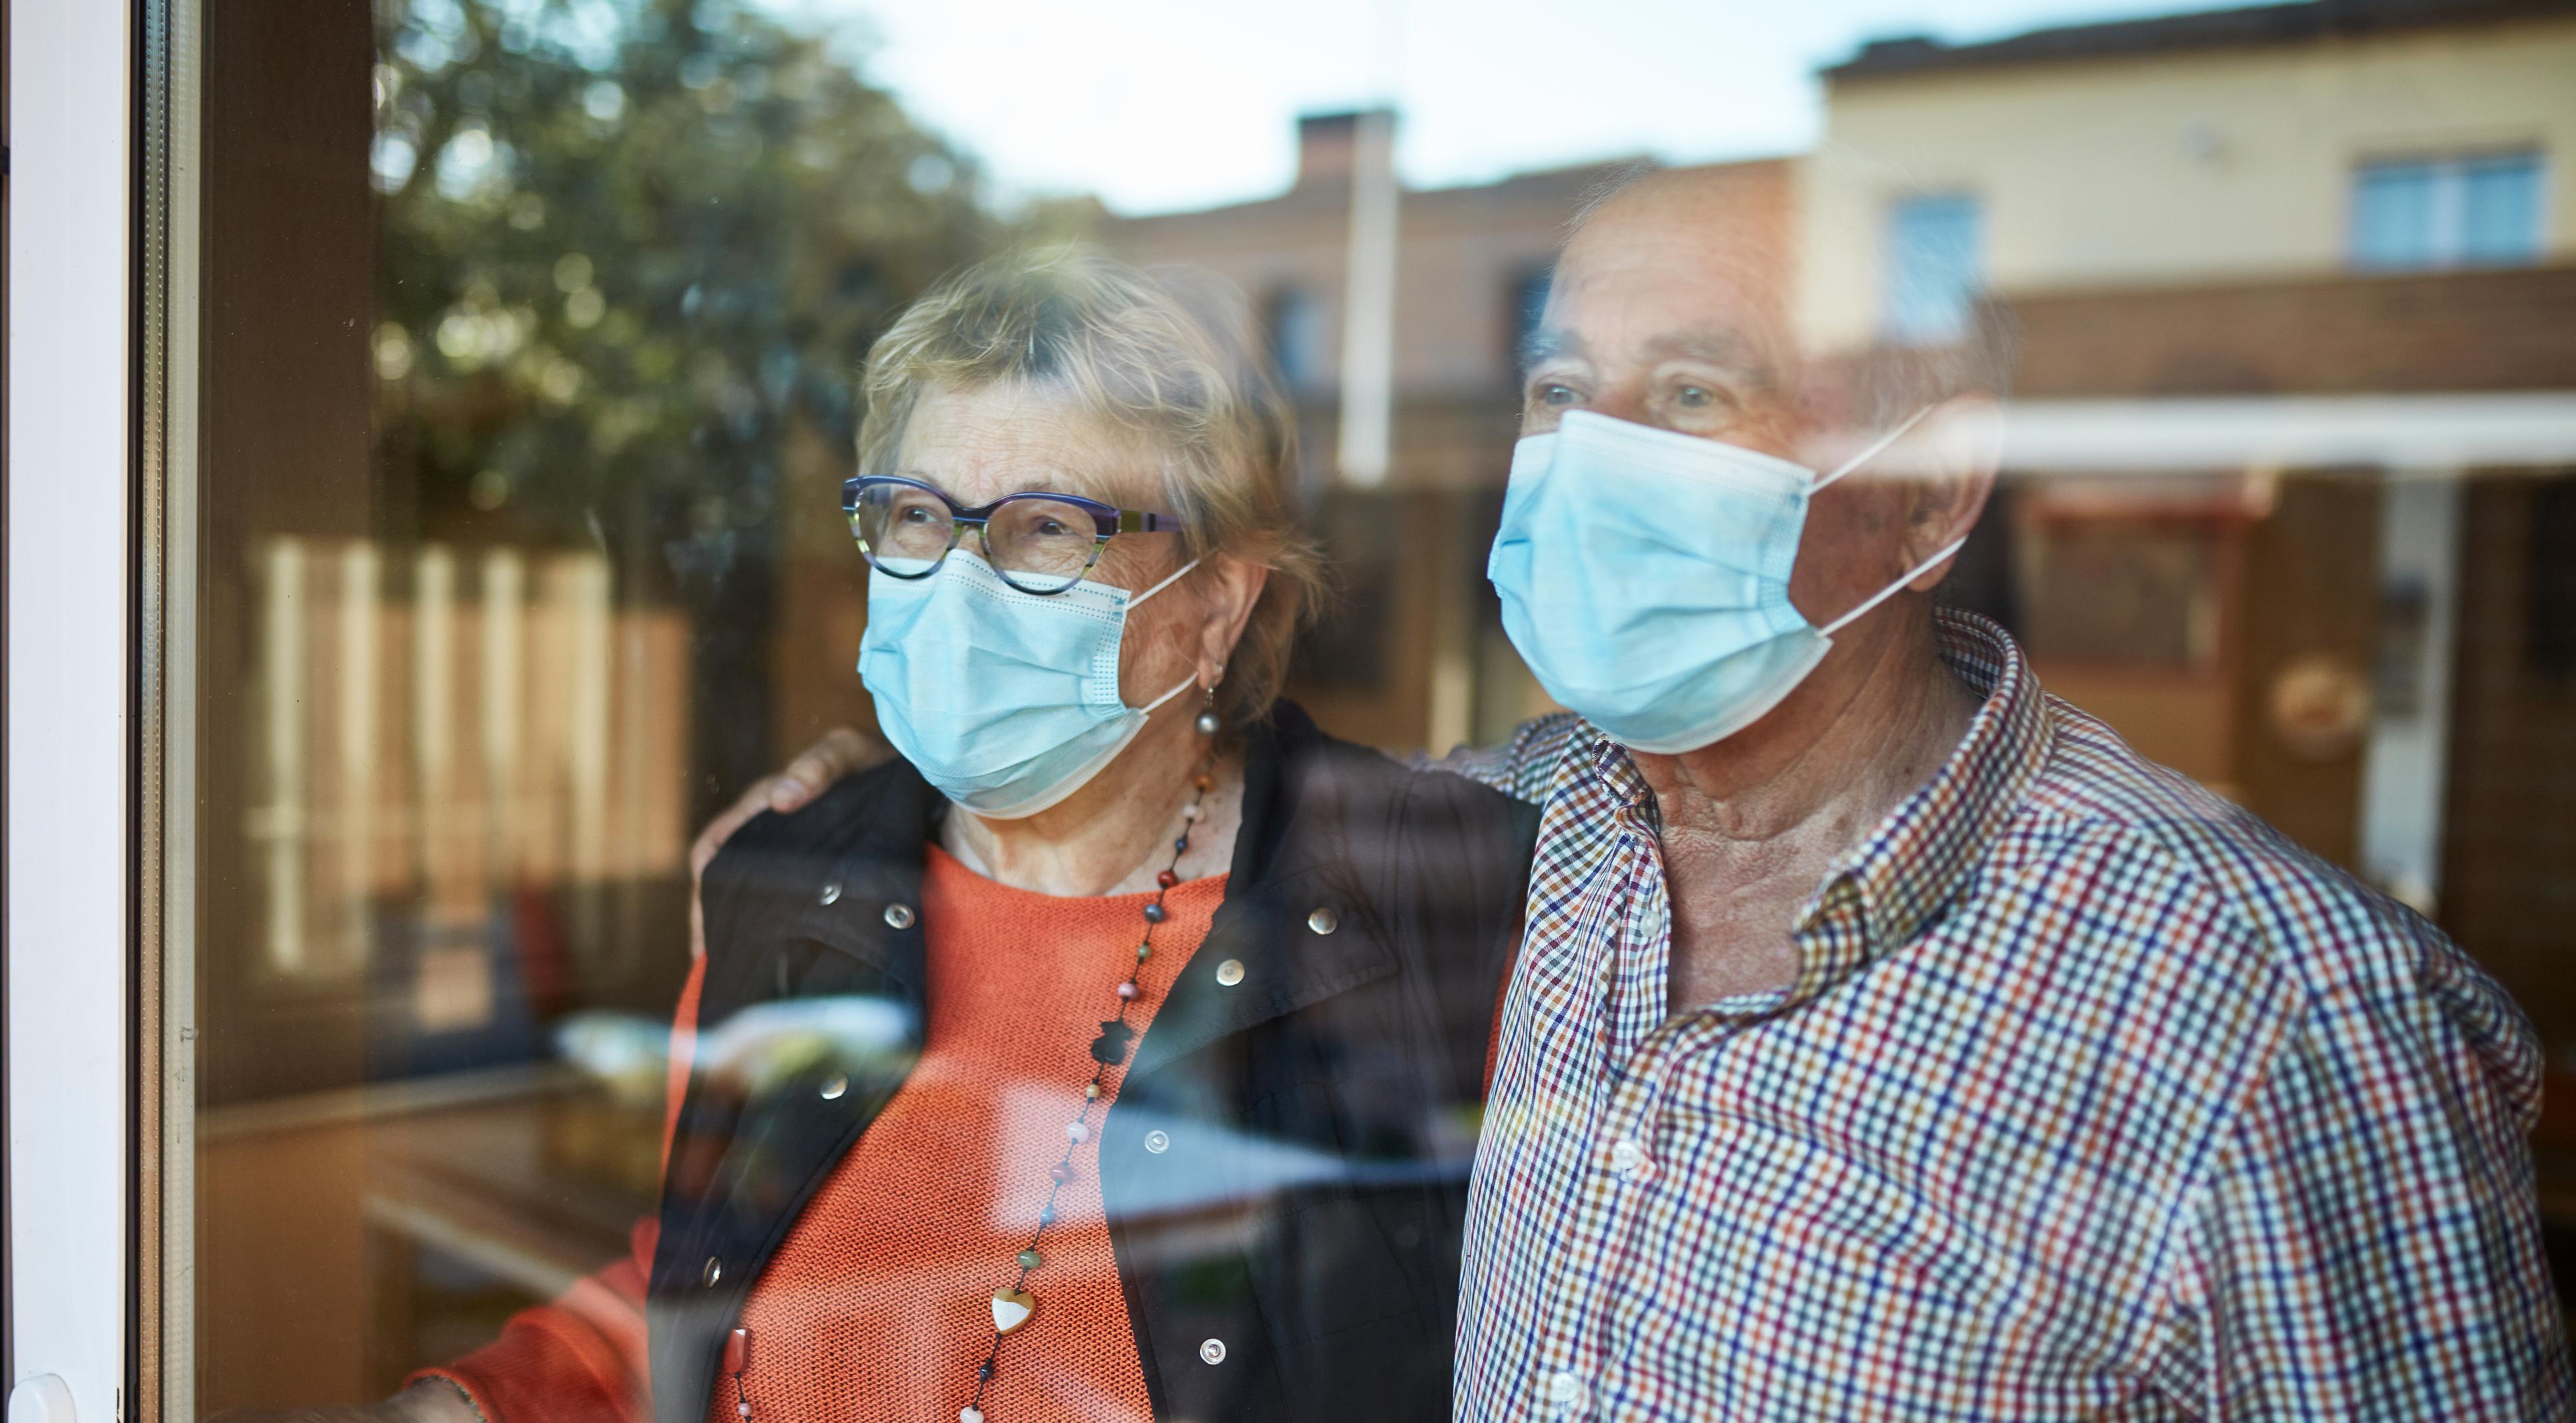 Seniors in an independent living facility wearing masks to protect from COVID-19.